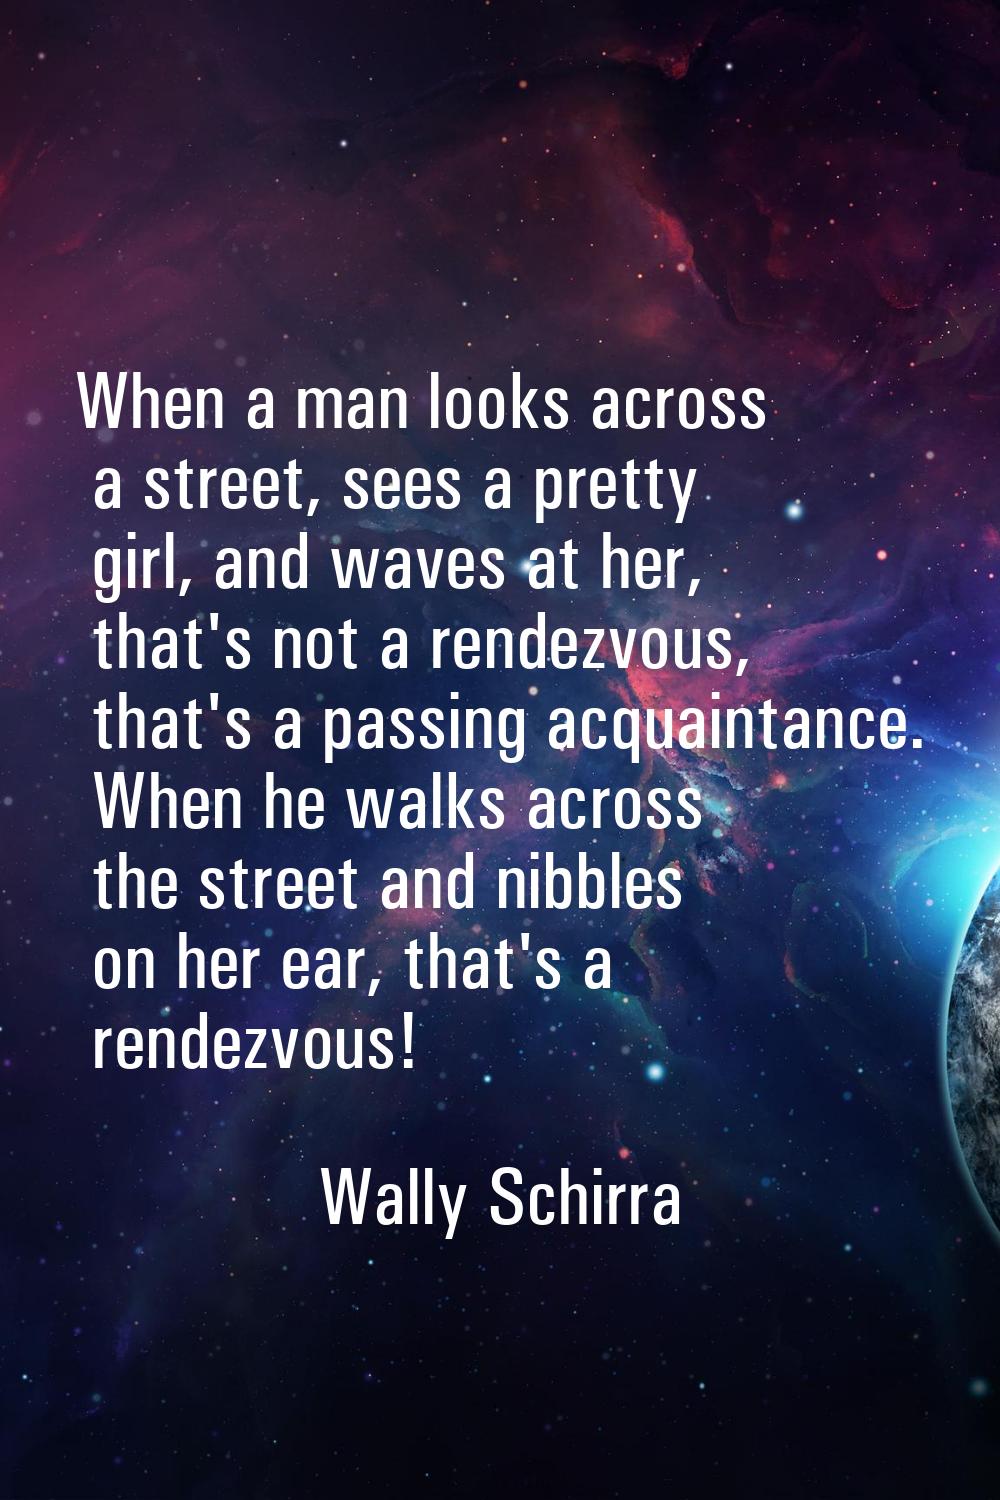 When a man looks across a street, sees a pretty girl, and waves at her, that's not a rendezvous, th